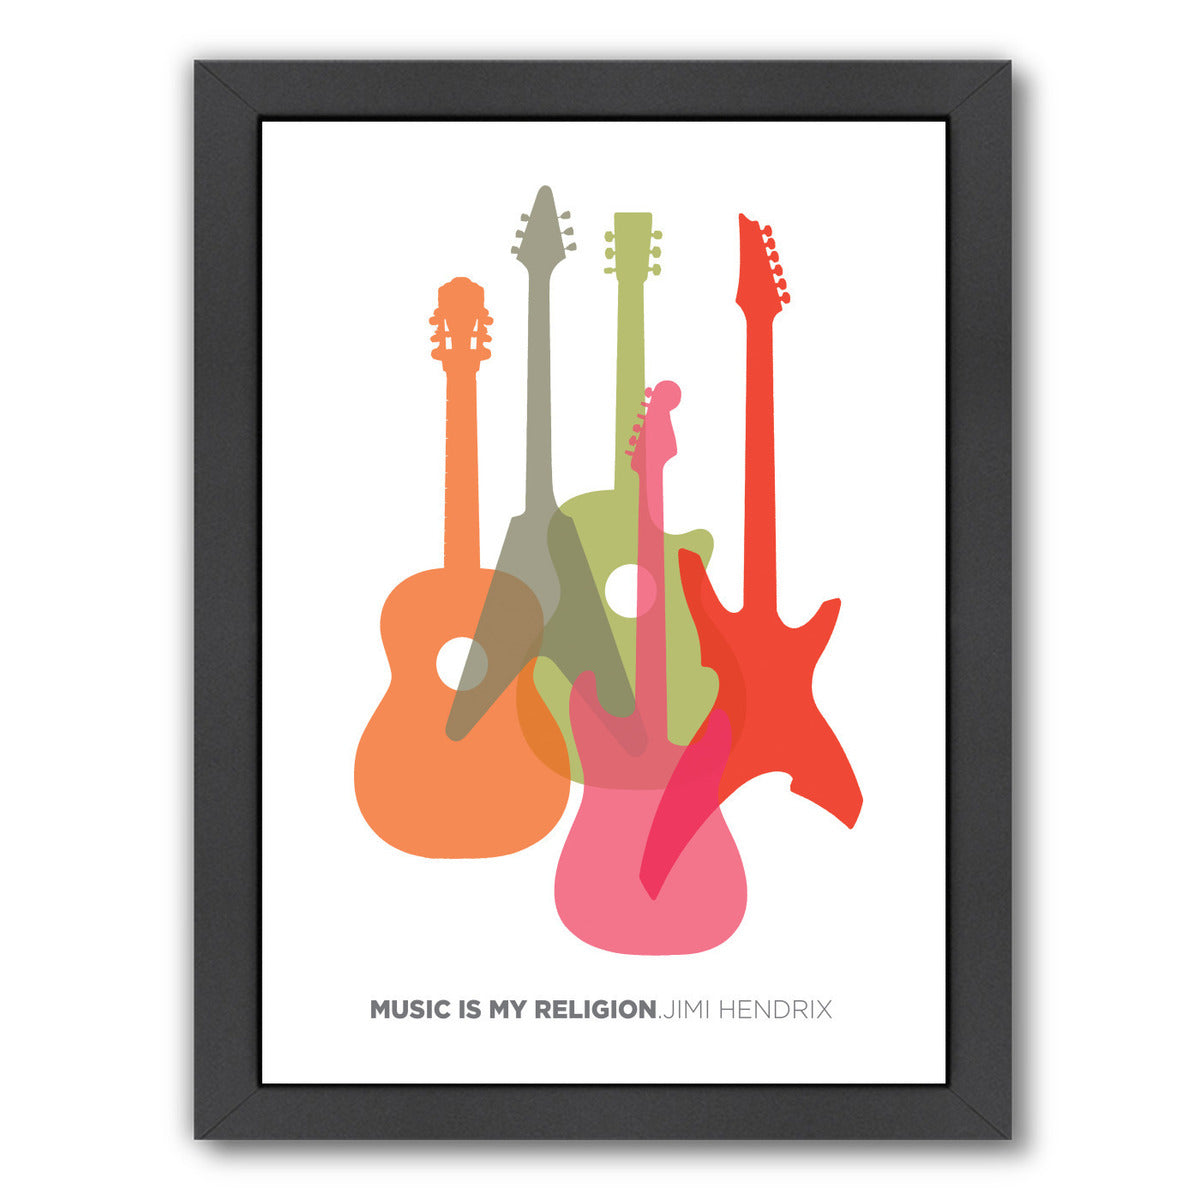 Music Is My Religion Hendrix by Visual Philosophy Framed Print - Americanflat